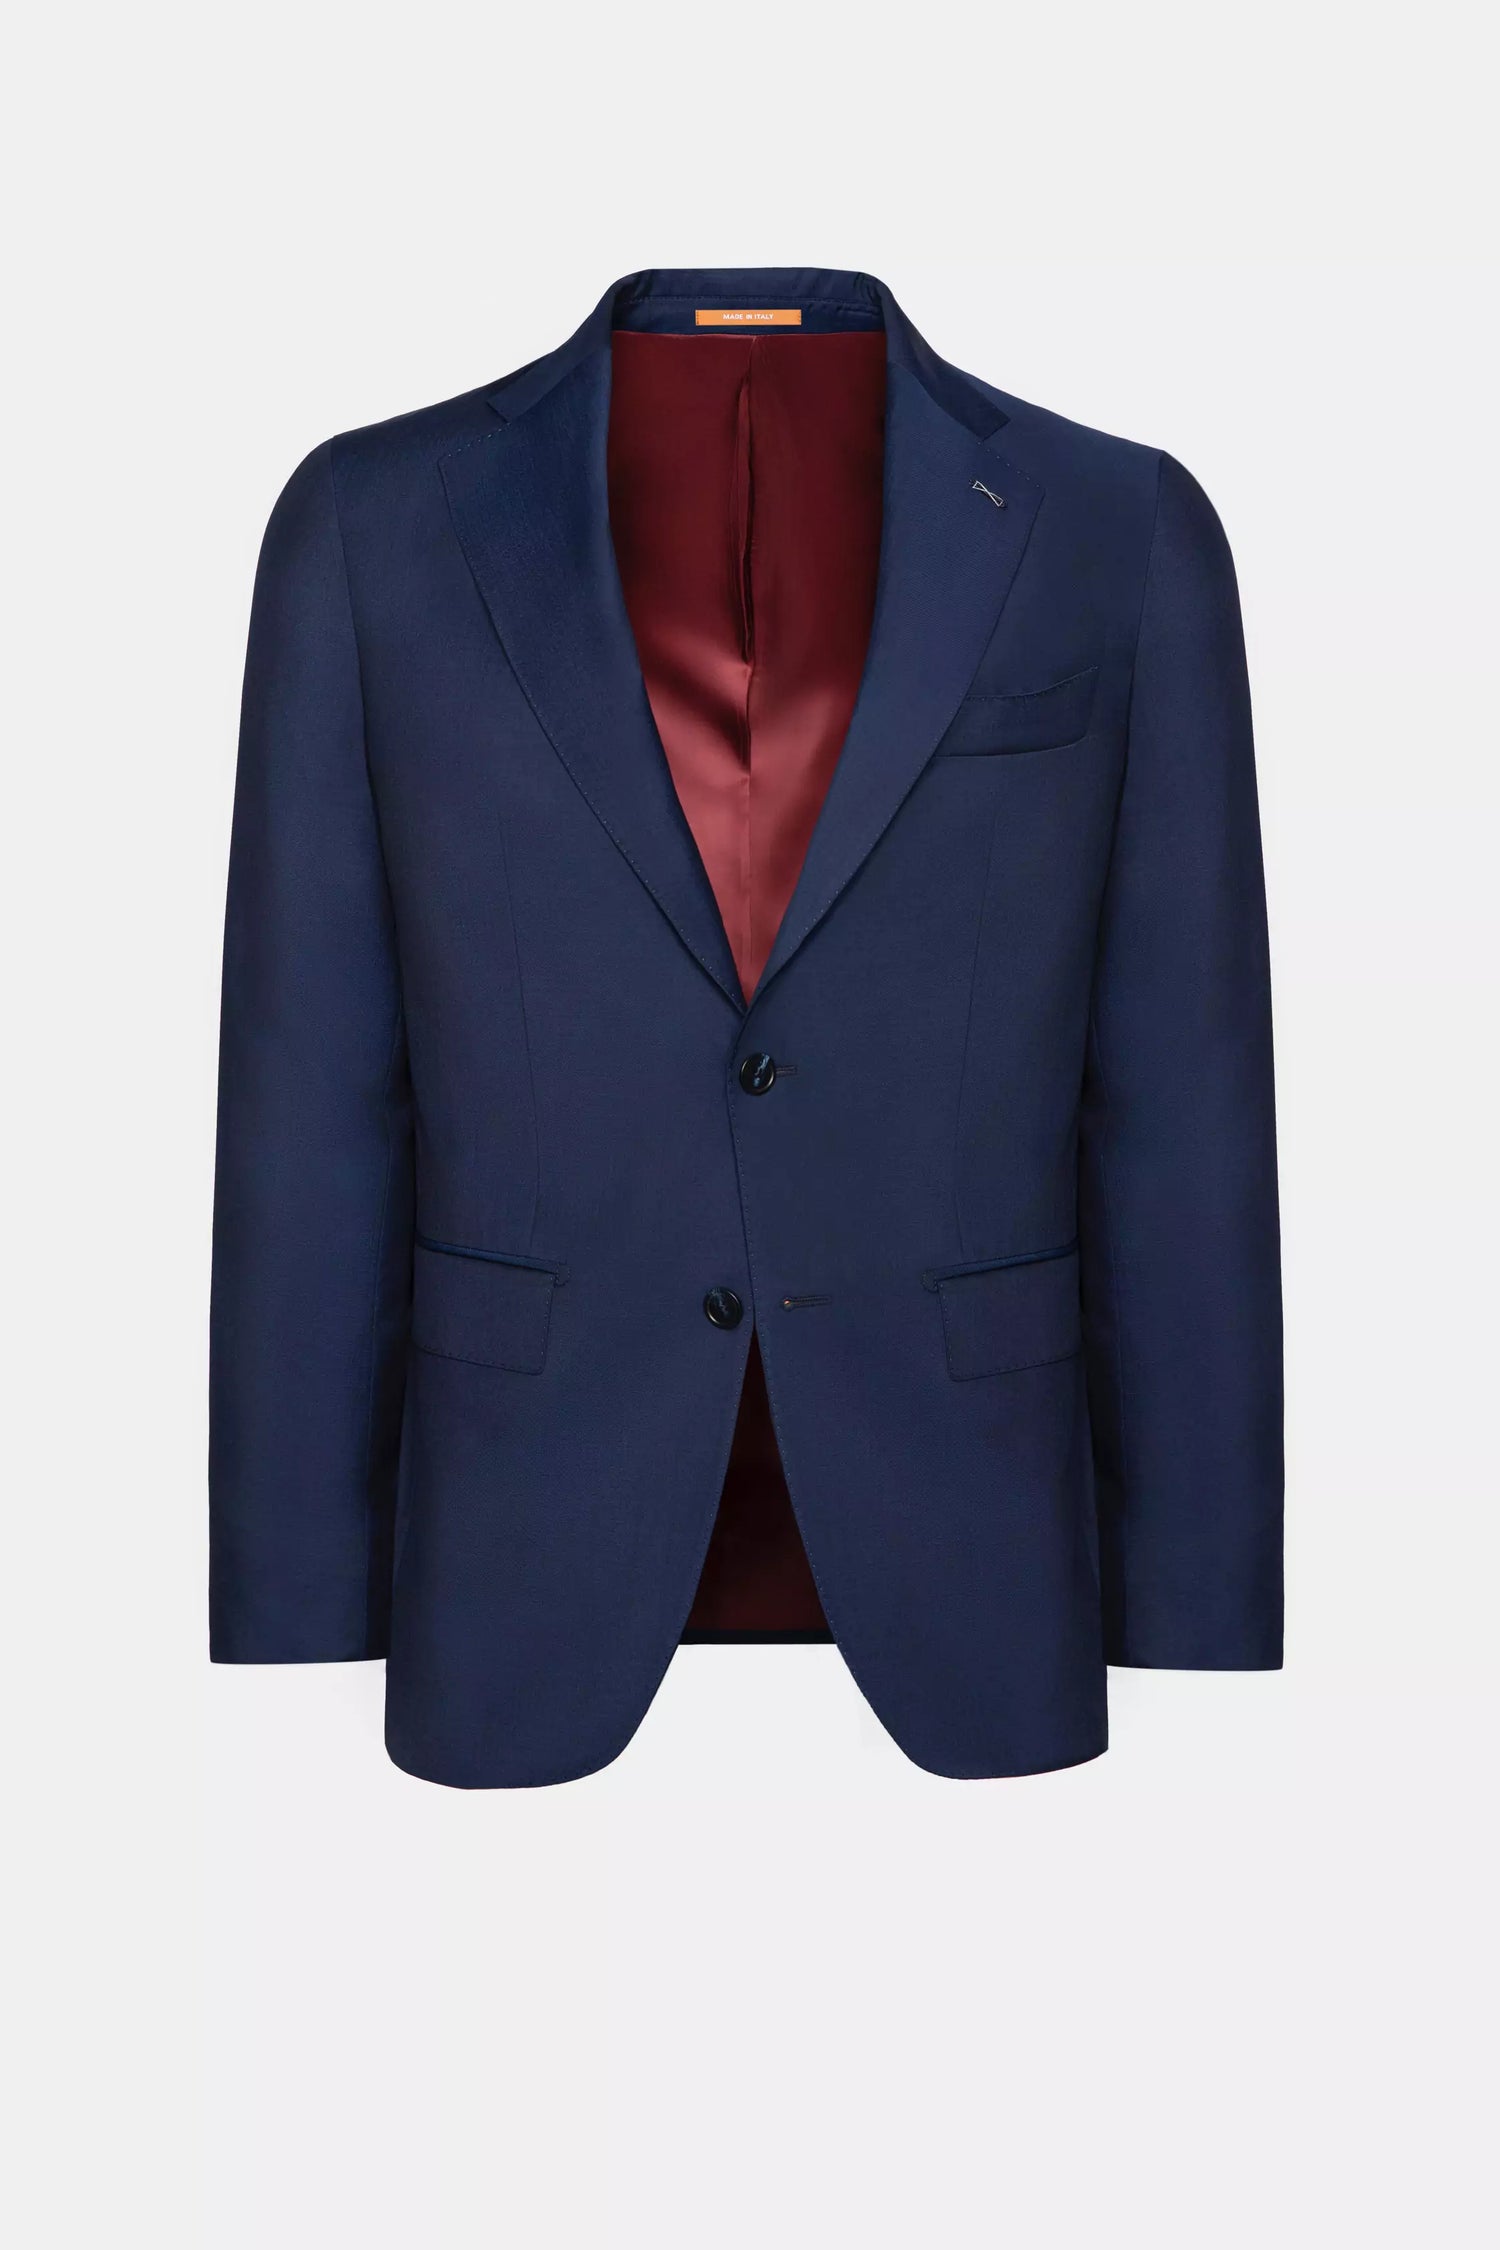 Navy Ego Suit Menswear Business Suits 